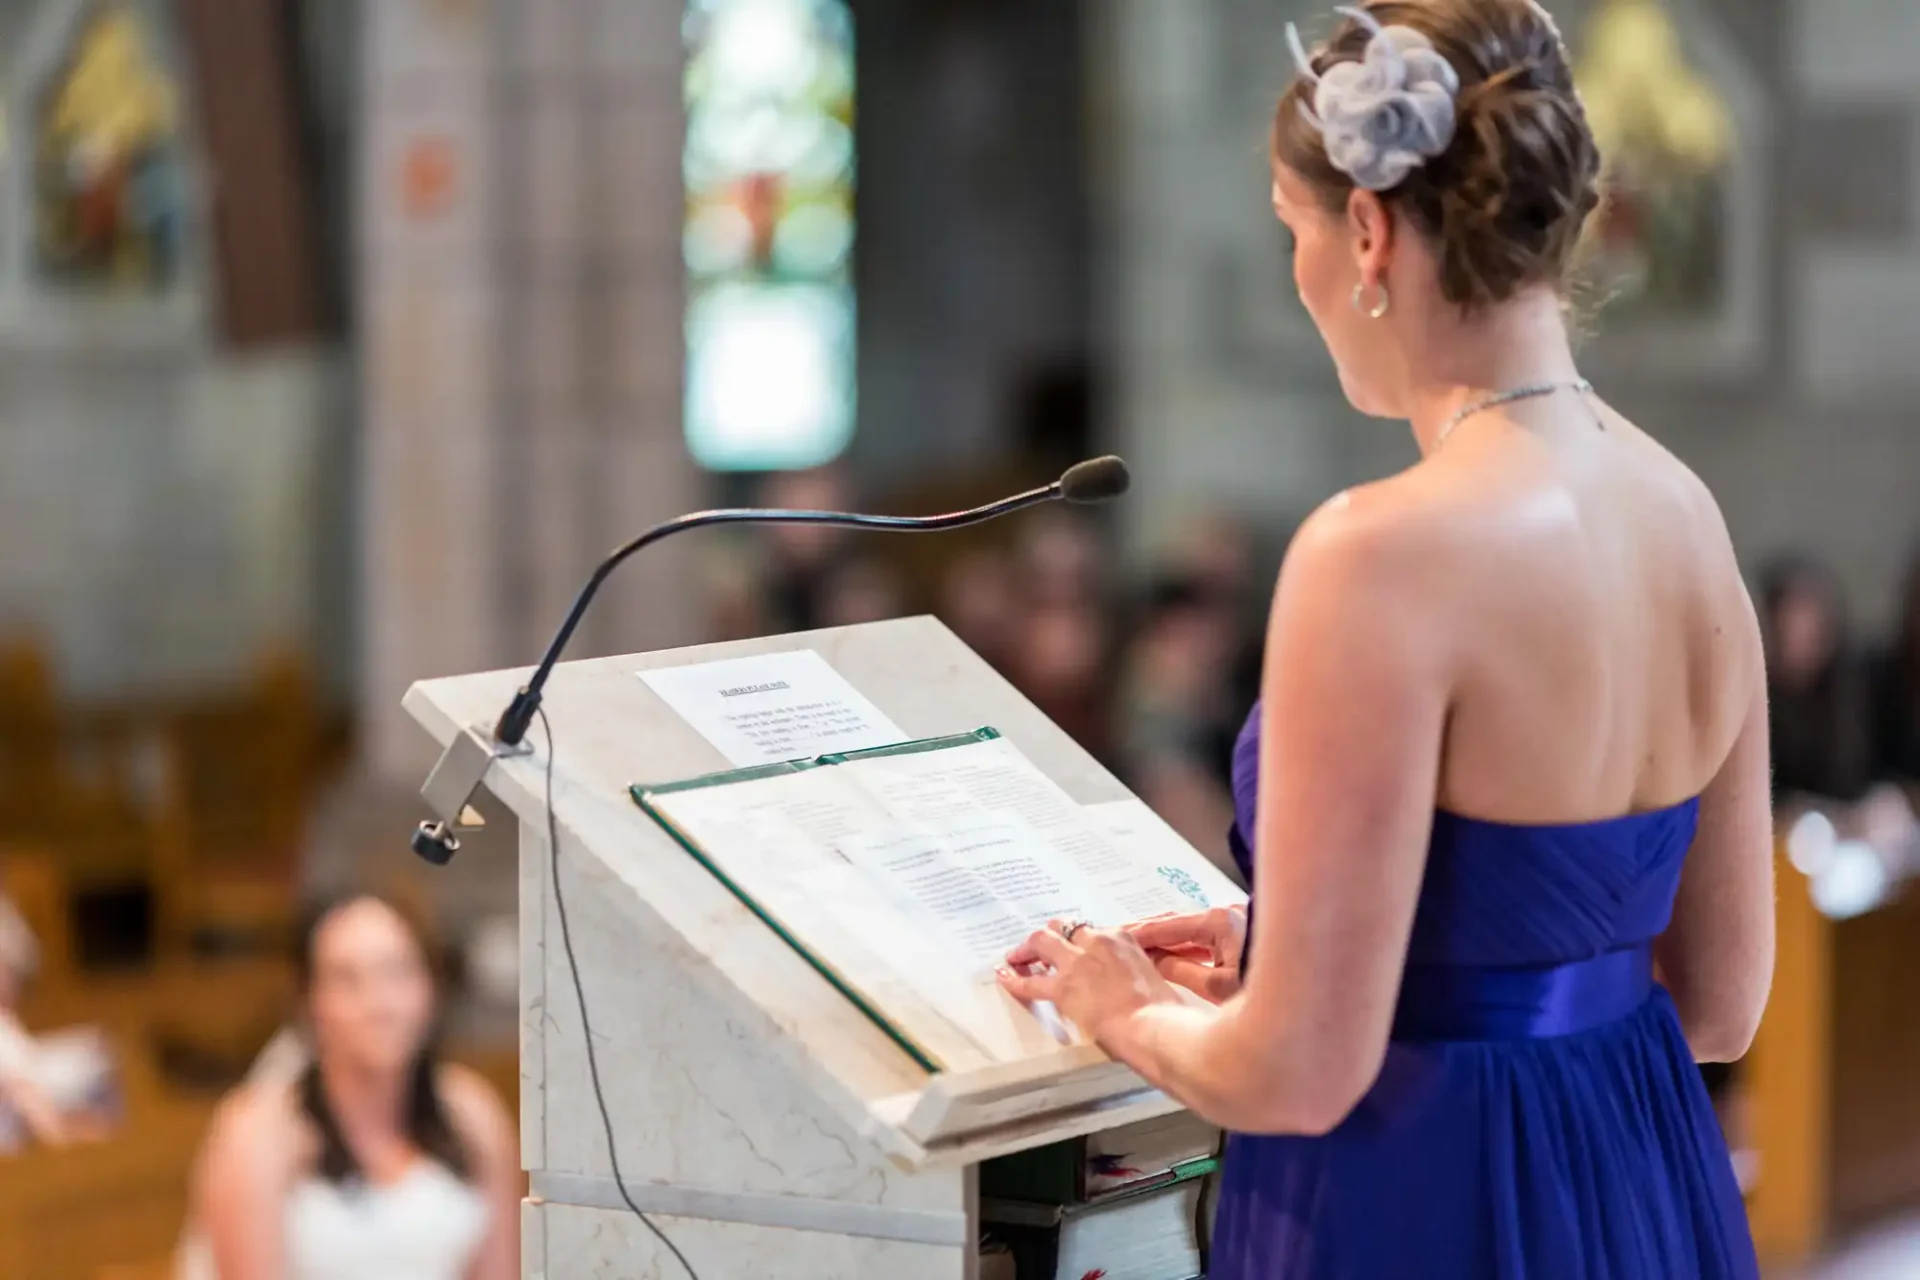 Woman in blue dress standing at lectern in church, reading from a book during a ceremony, with blurred background.